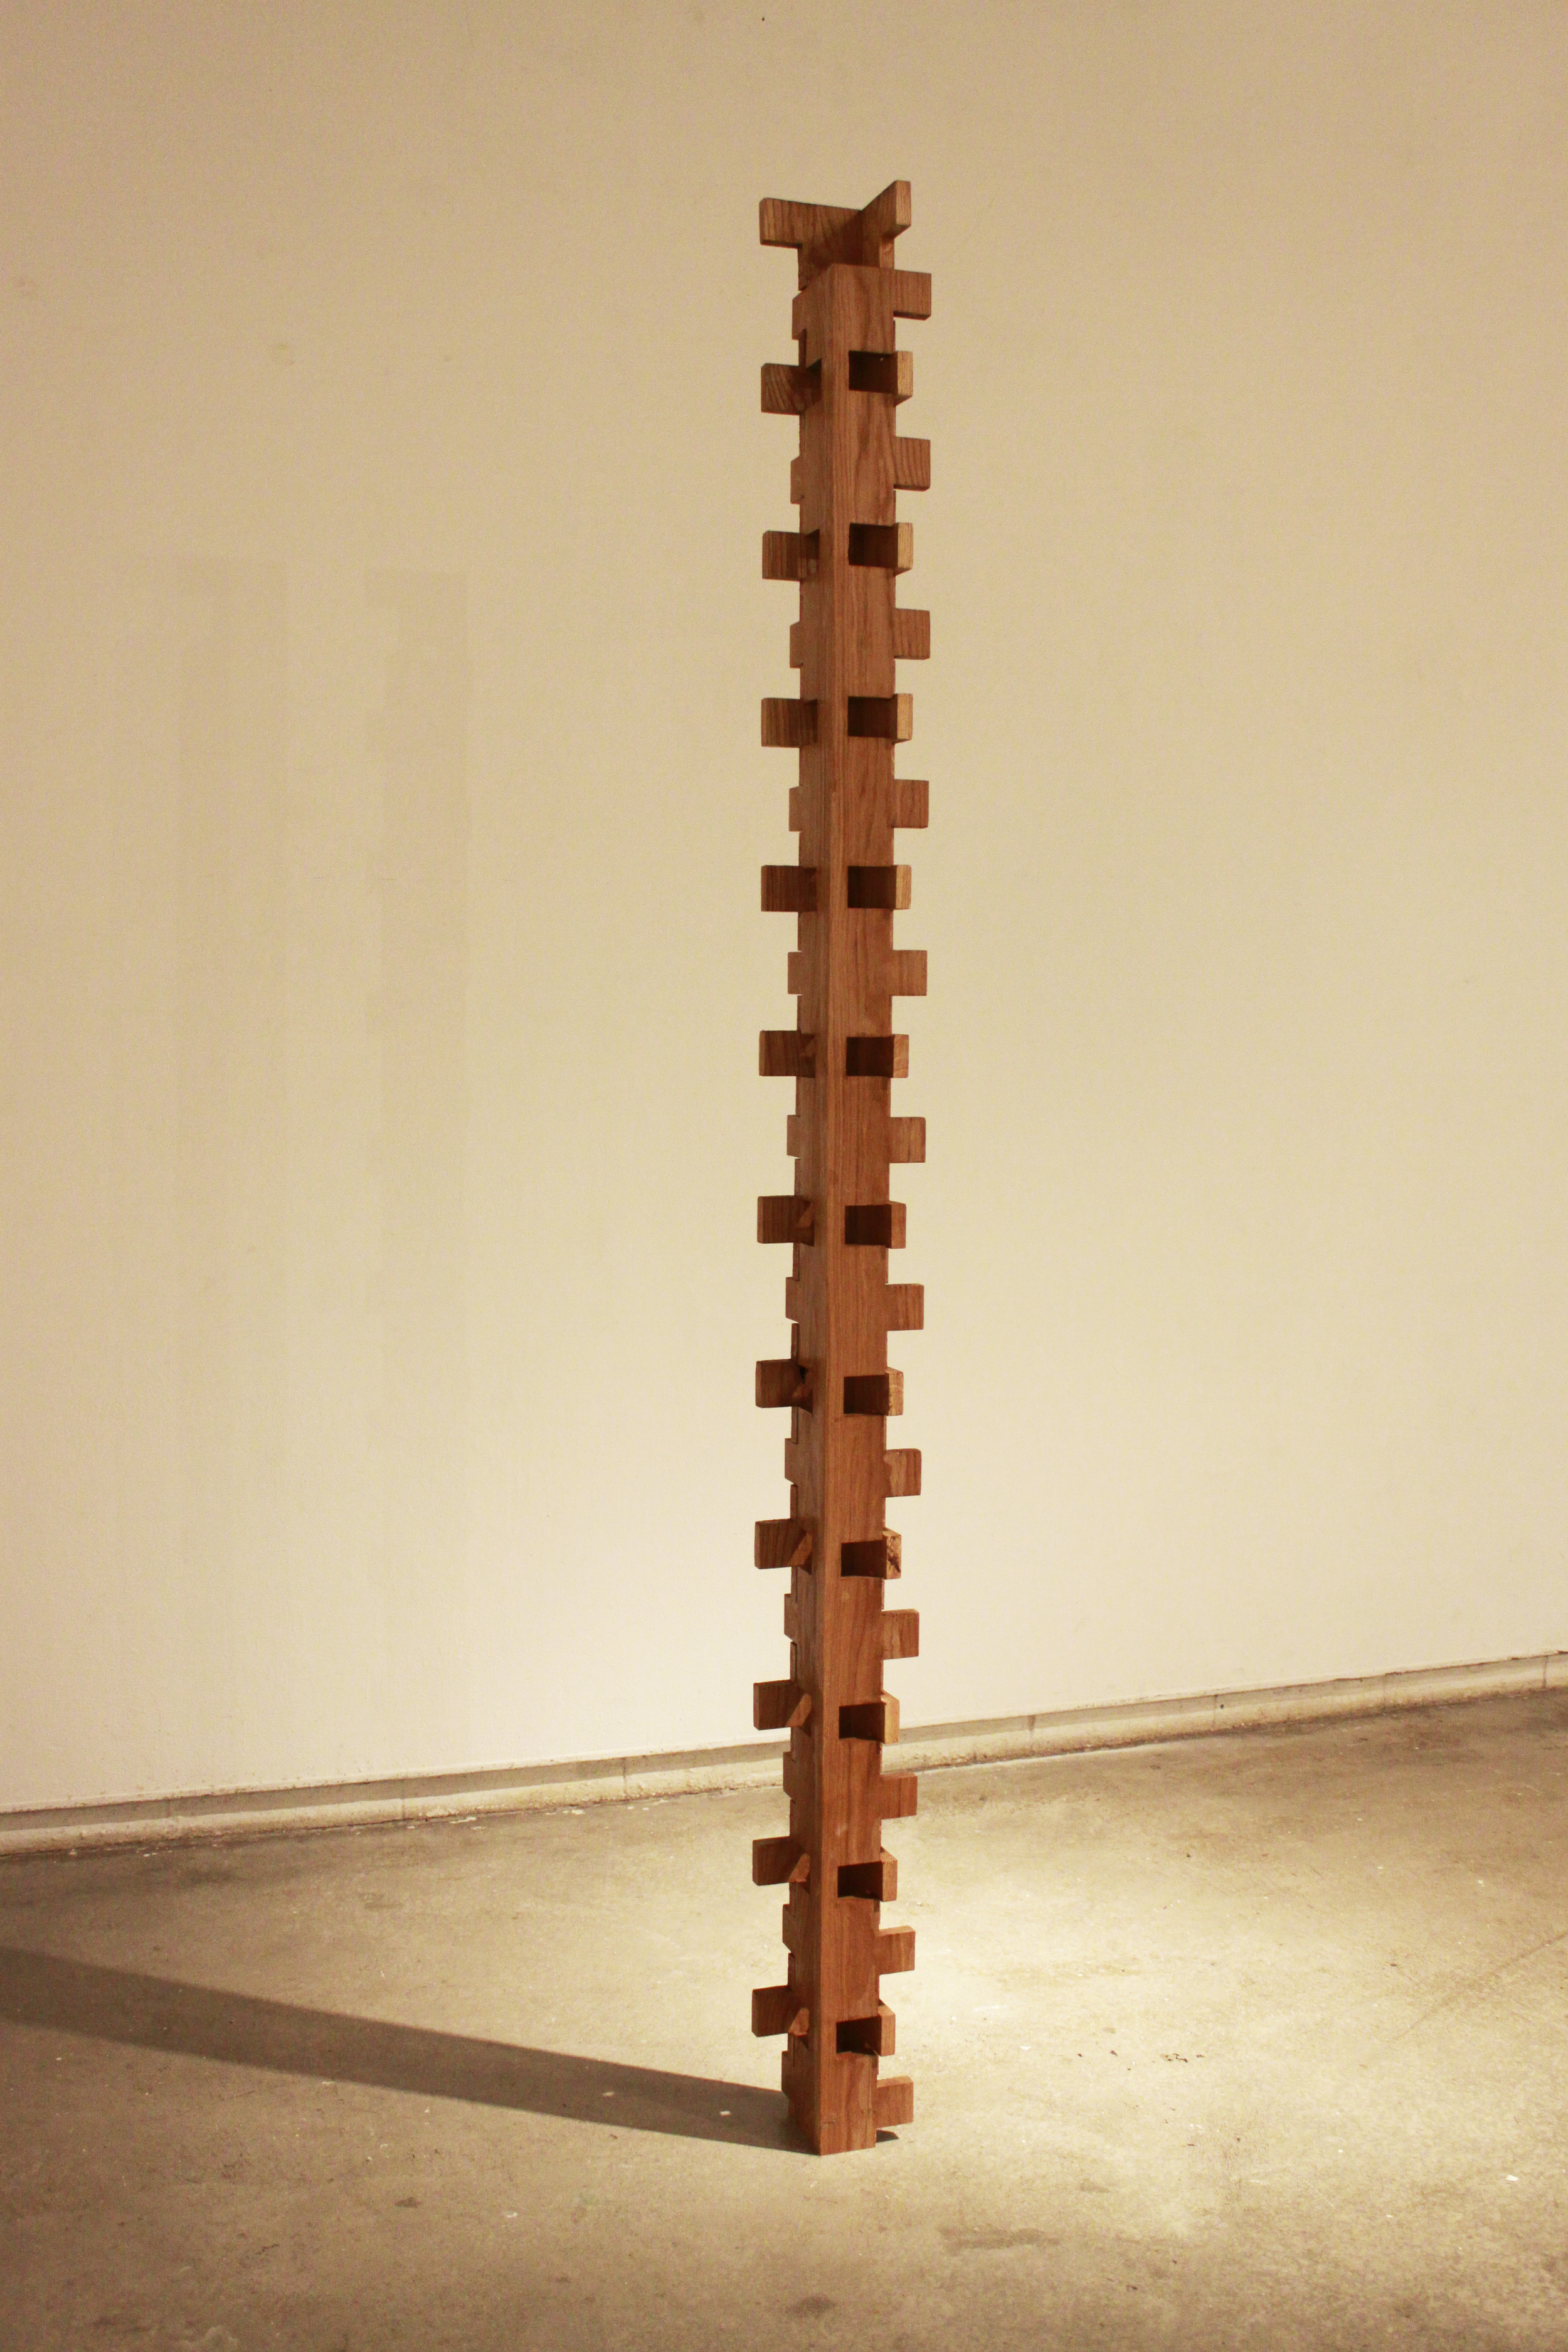  Untitled, 2011, two planks of green teak wood cut and assembled, 8’ x 6.5” x 6.5” 